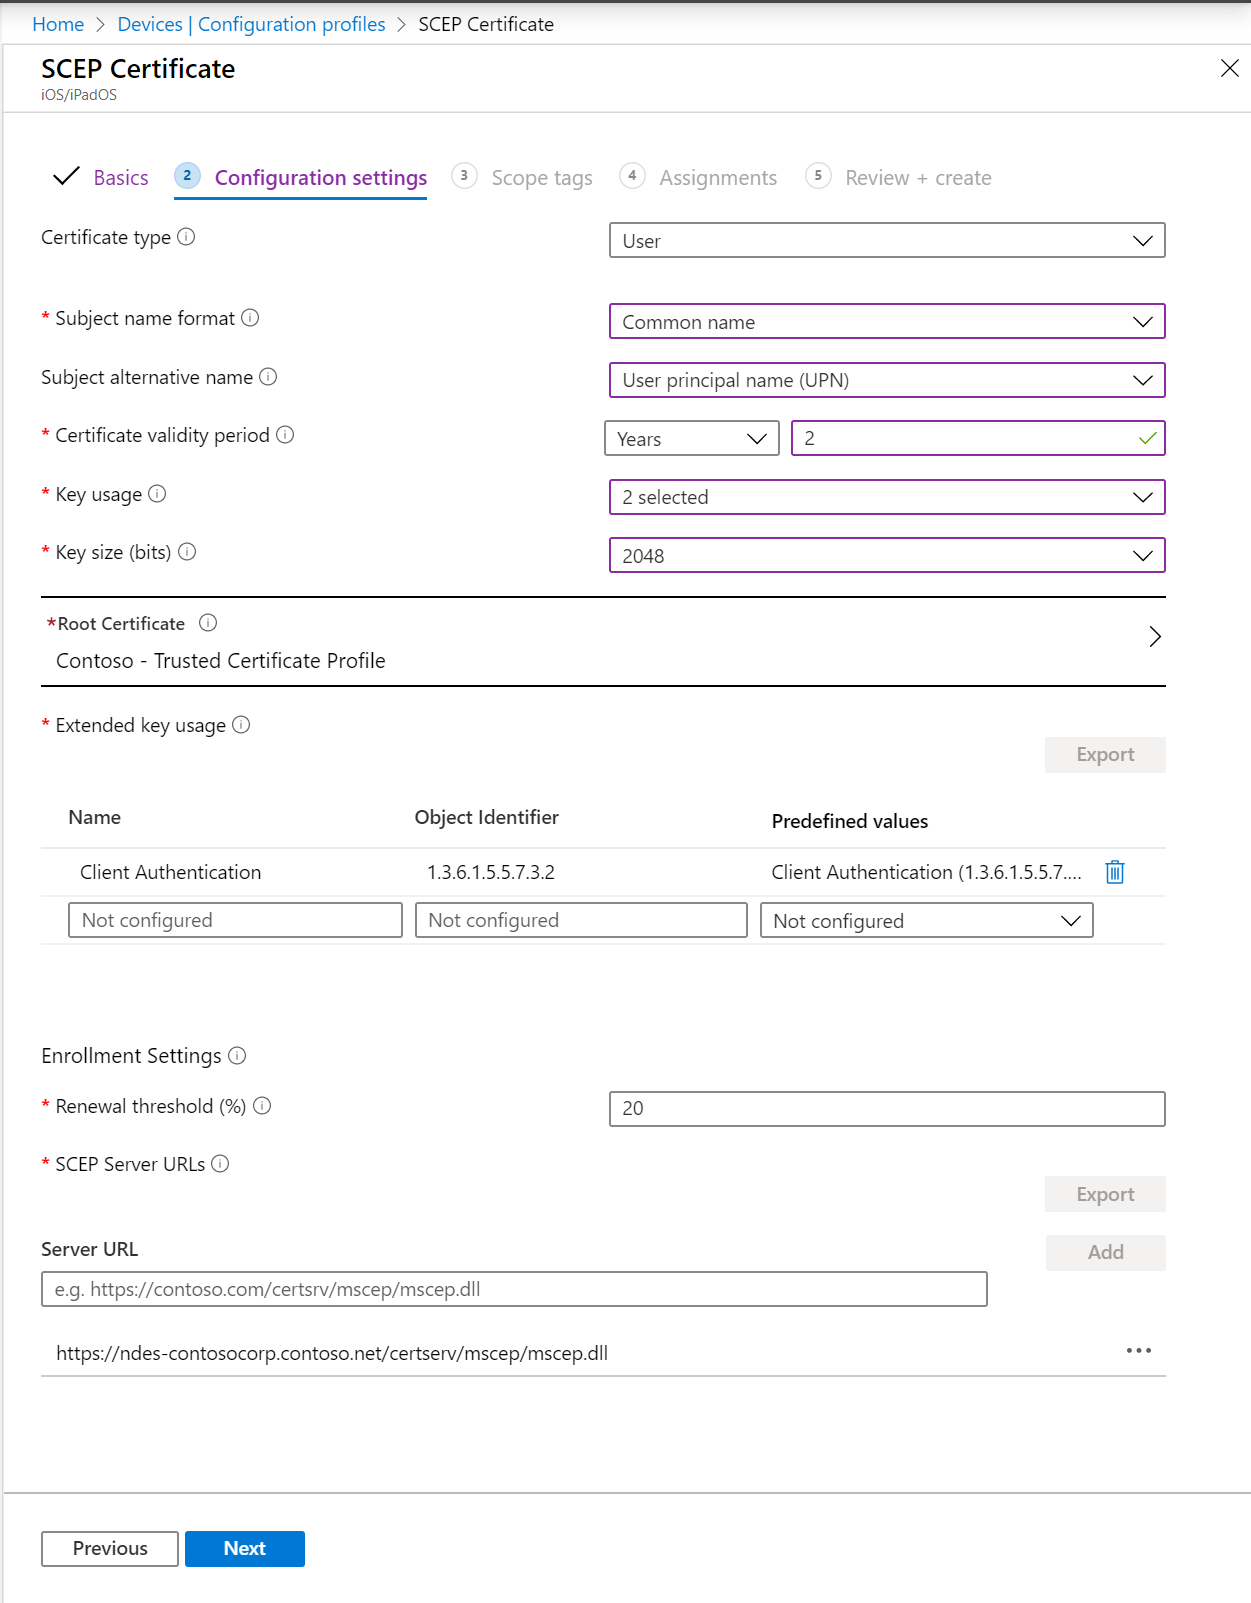 Create a SCEP certificate profile in Microsoft Intune and Endpoint Manager admin center. Include the subject name format, key usage, extended key usage, and more.